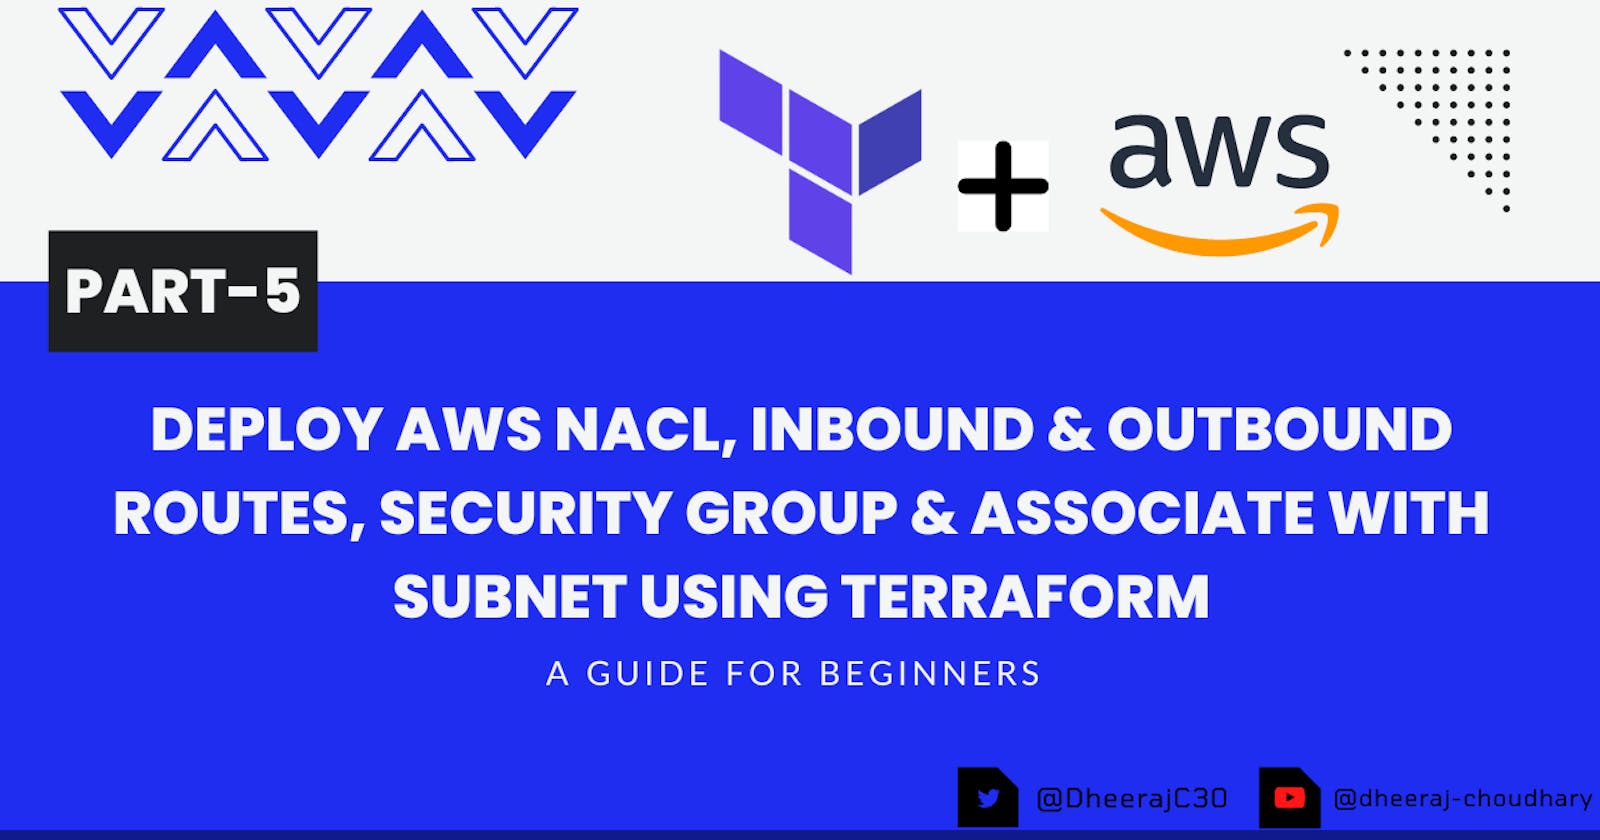 Deploy AWS NACL, Inbound & Outbound Routes, Security Group & Associate With Subnet Using Terraform